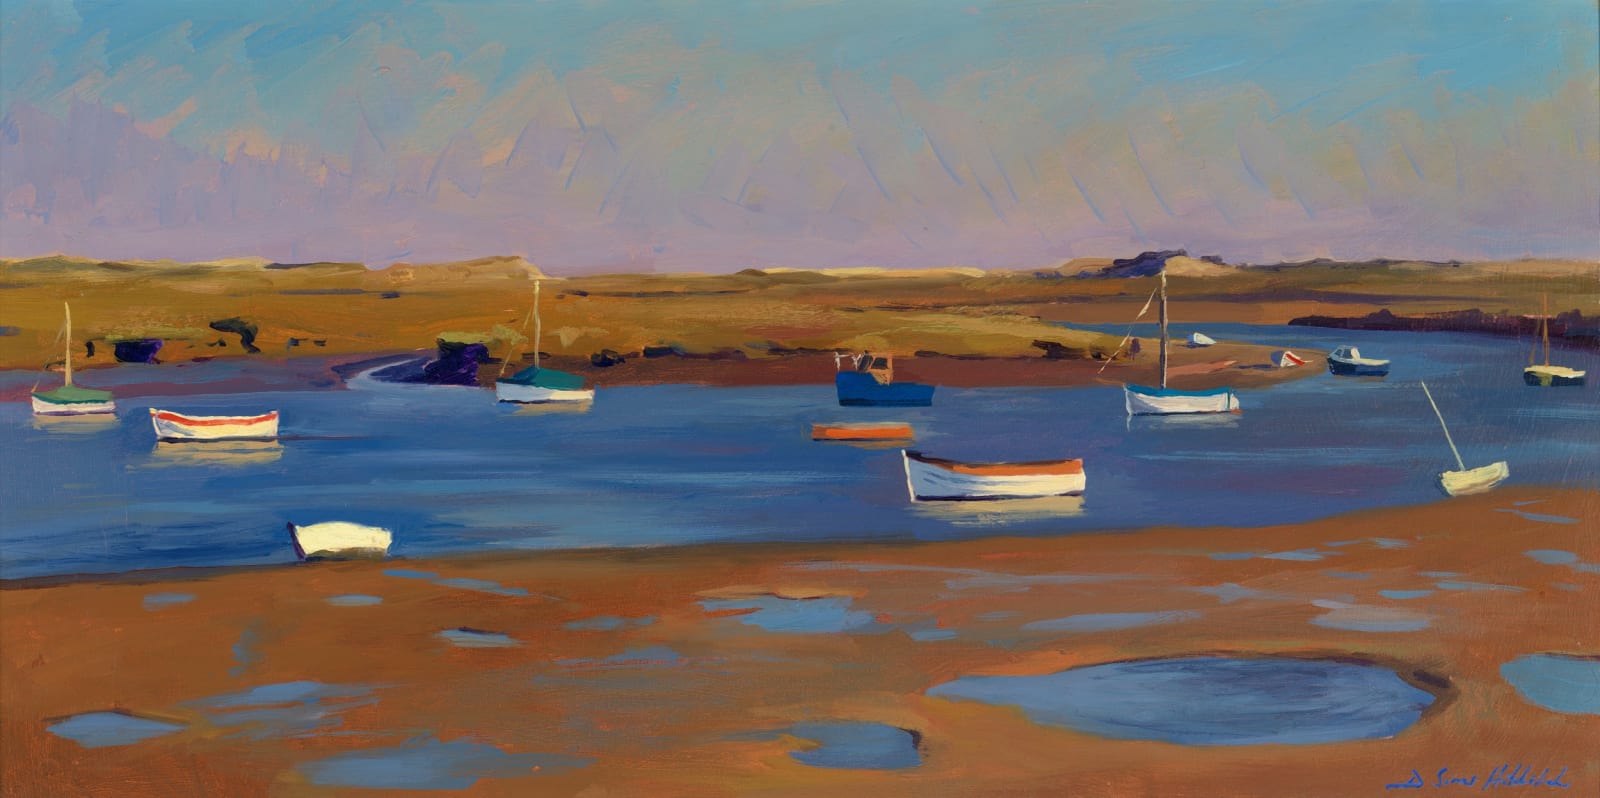 Daisy Sims Hilditch, Boats at Burnham Overy Staithe, Autumnal morning, 2022